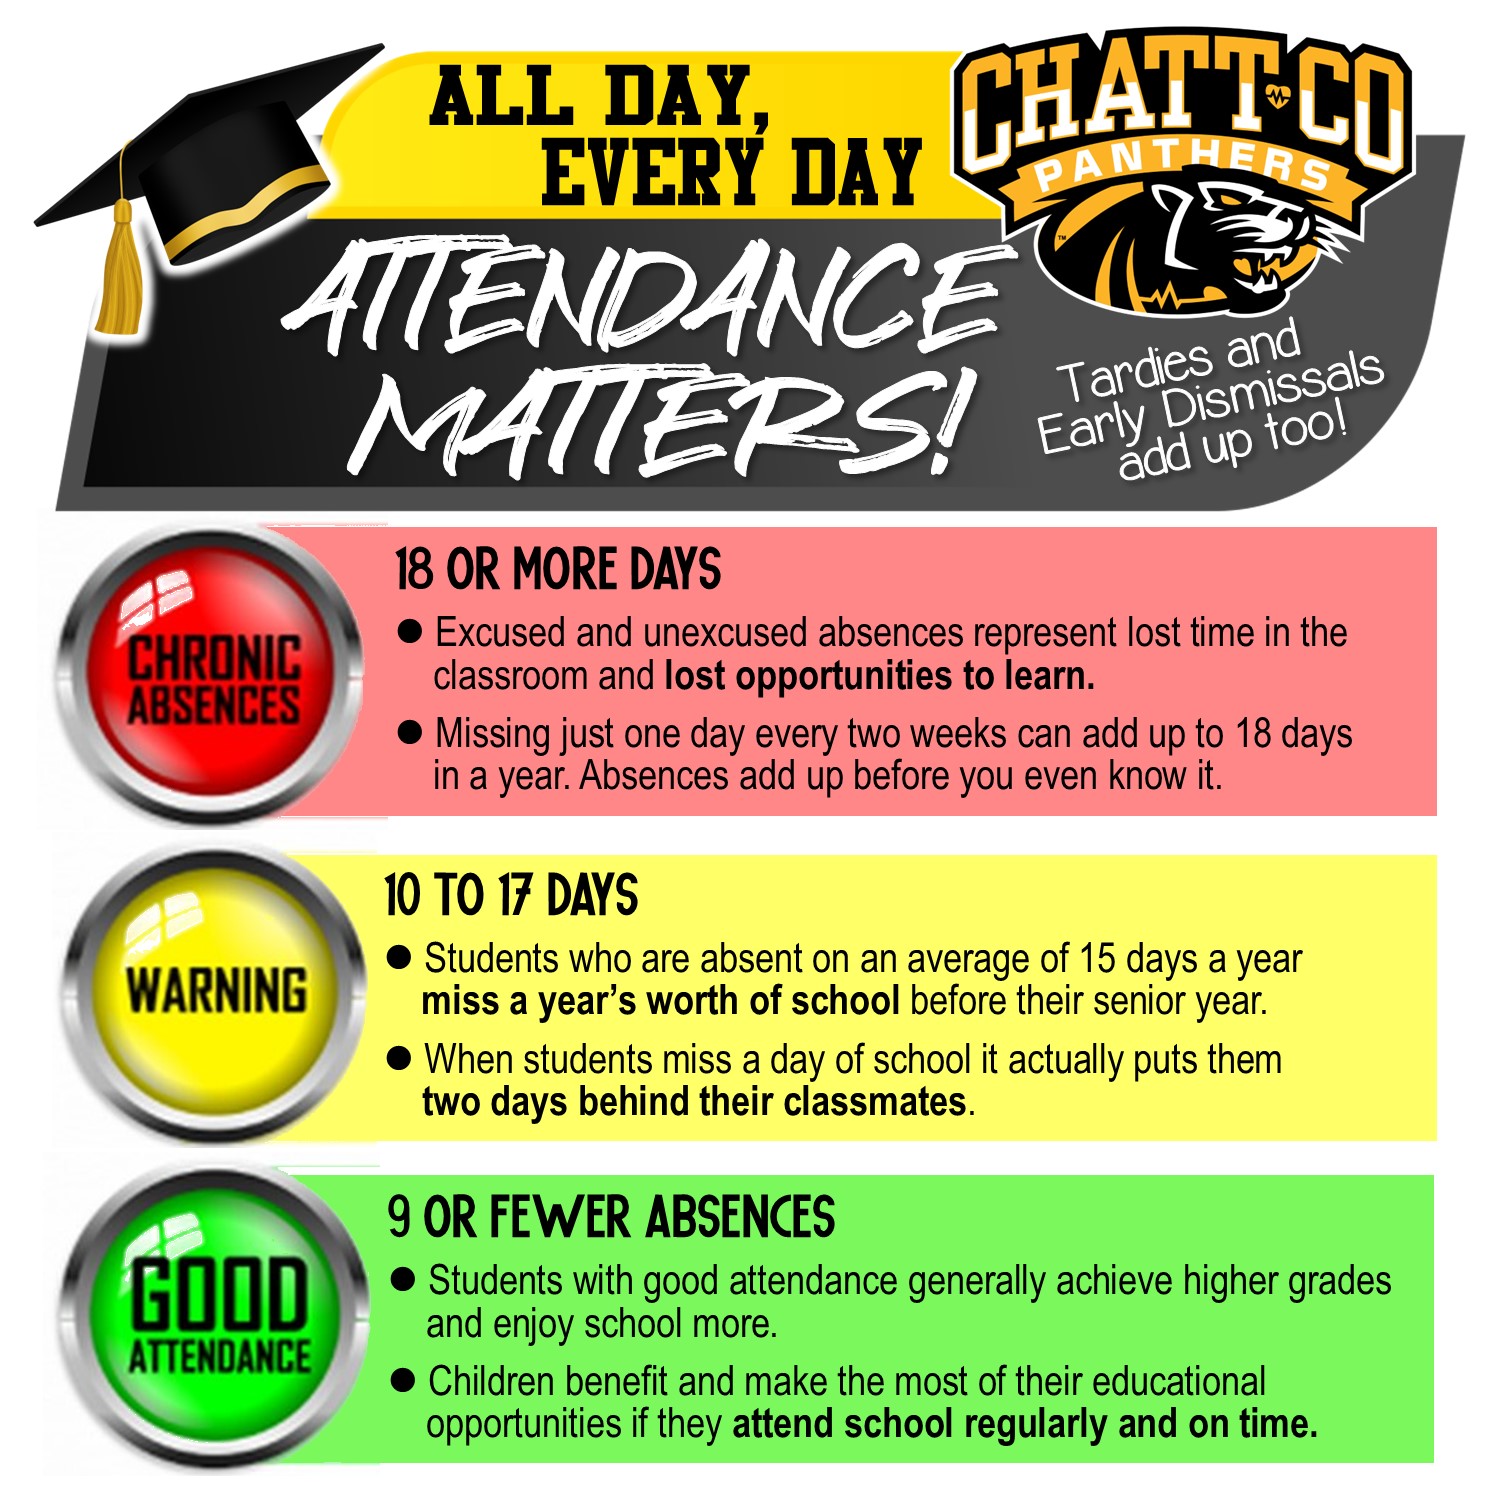 Attendance Matters, all day, every day. Chronic Absences: 18 OR MORE DAYS   Excused and unexcused absences represent lost time in the classroom and lost opportunities to learn.  Missing just one day every two weeks can add up to 18 days in a year. Absences add up before you even know it. WARNING: 10 to 17 DAYS Students who are absent on an average of 15 days a year miss a year’s worth of school before their senior year. When students miss a day of school it actually puts them two days behind their classmates. GOOD ATTENDANCE: 9 or FEWER ABSENCES. Students with good attendance generally achieve higher grades and enjoy school more. Children benefit and make the most of their educational  opportunities if they attend school regularly and on time